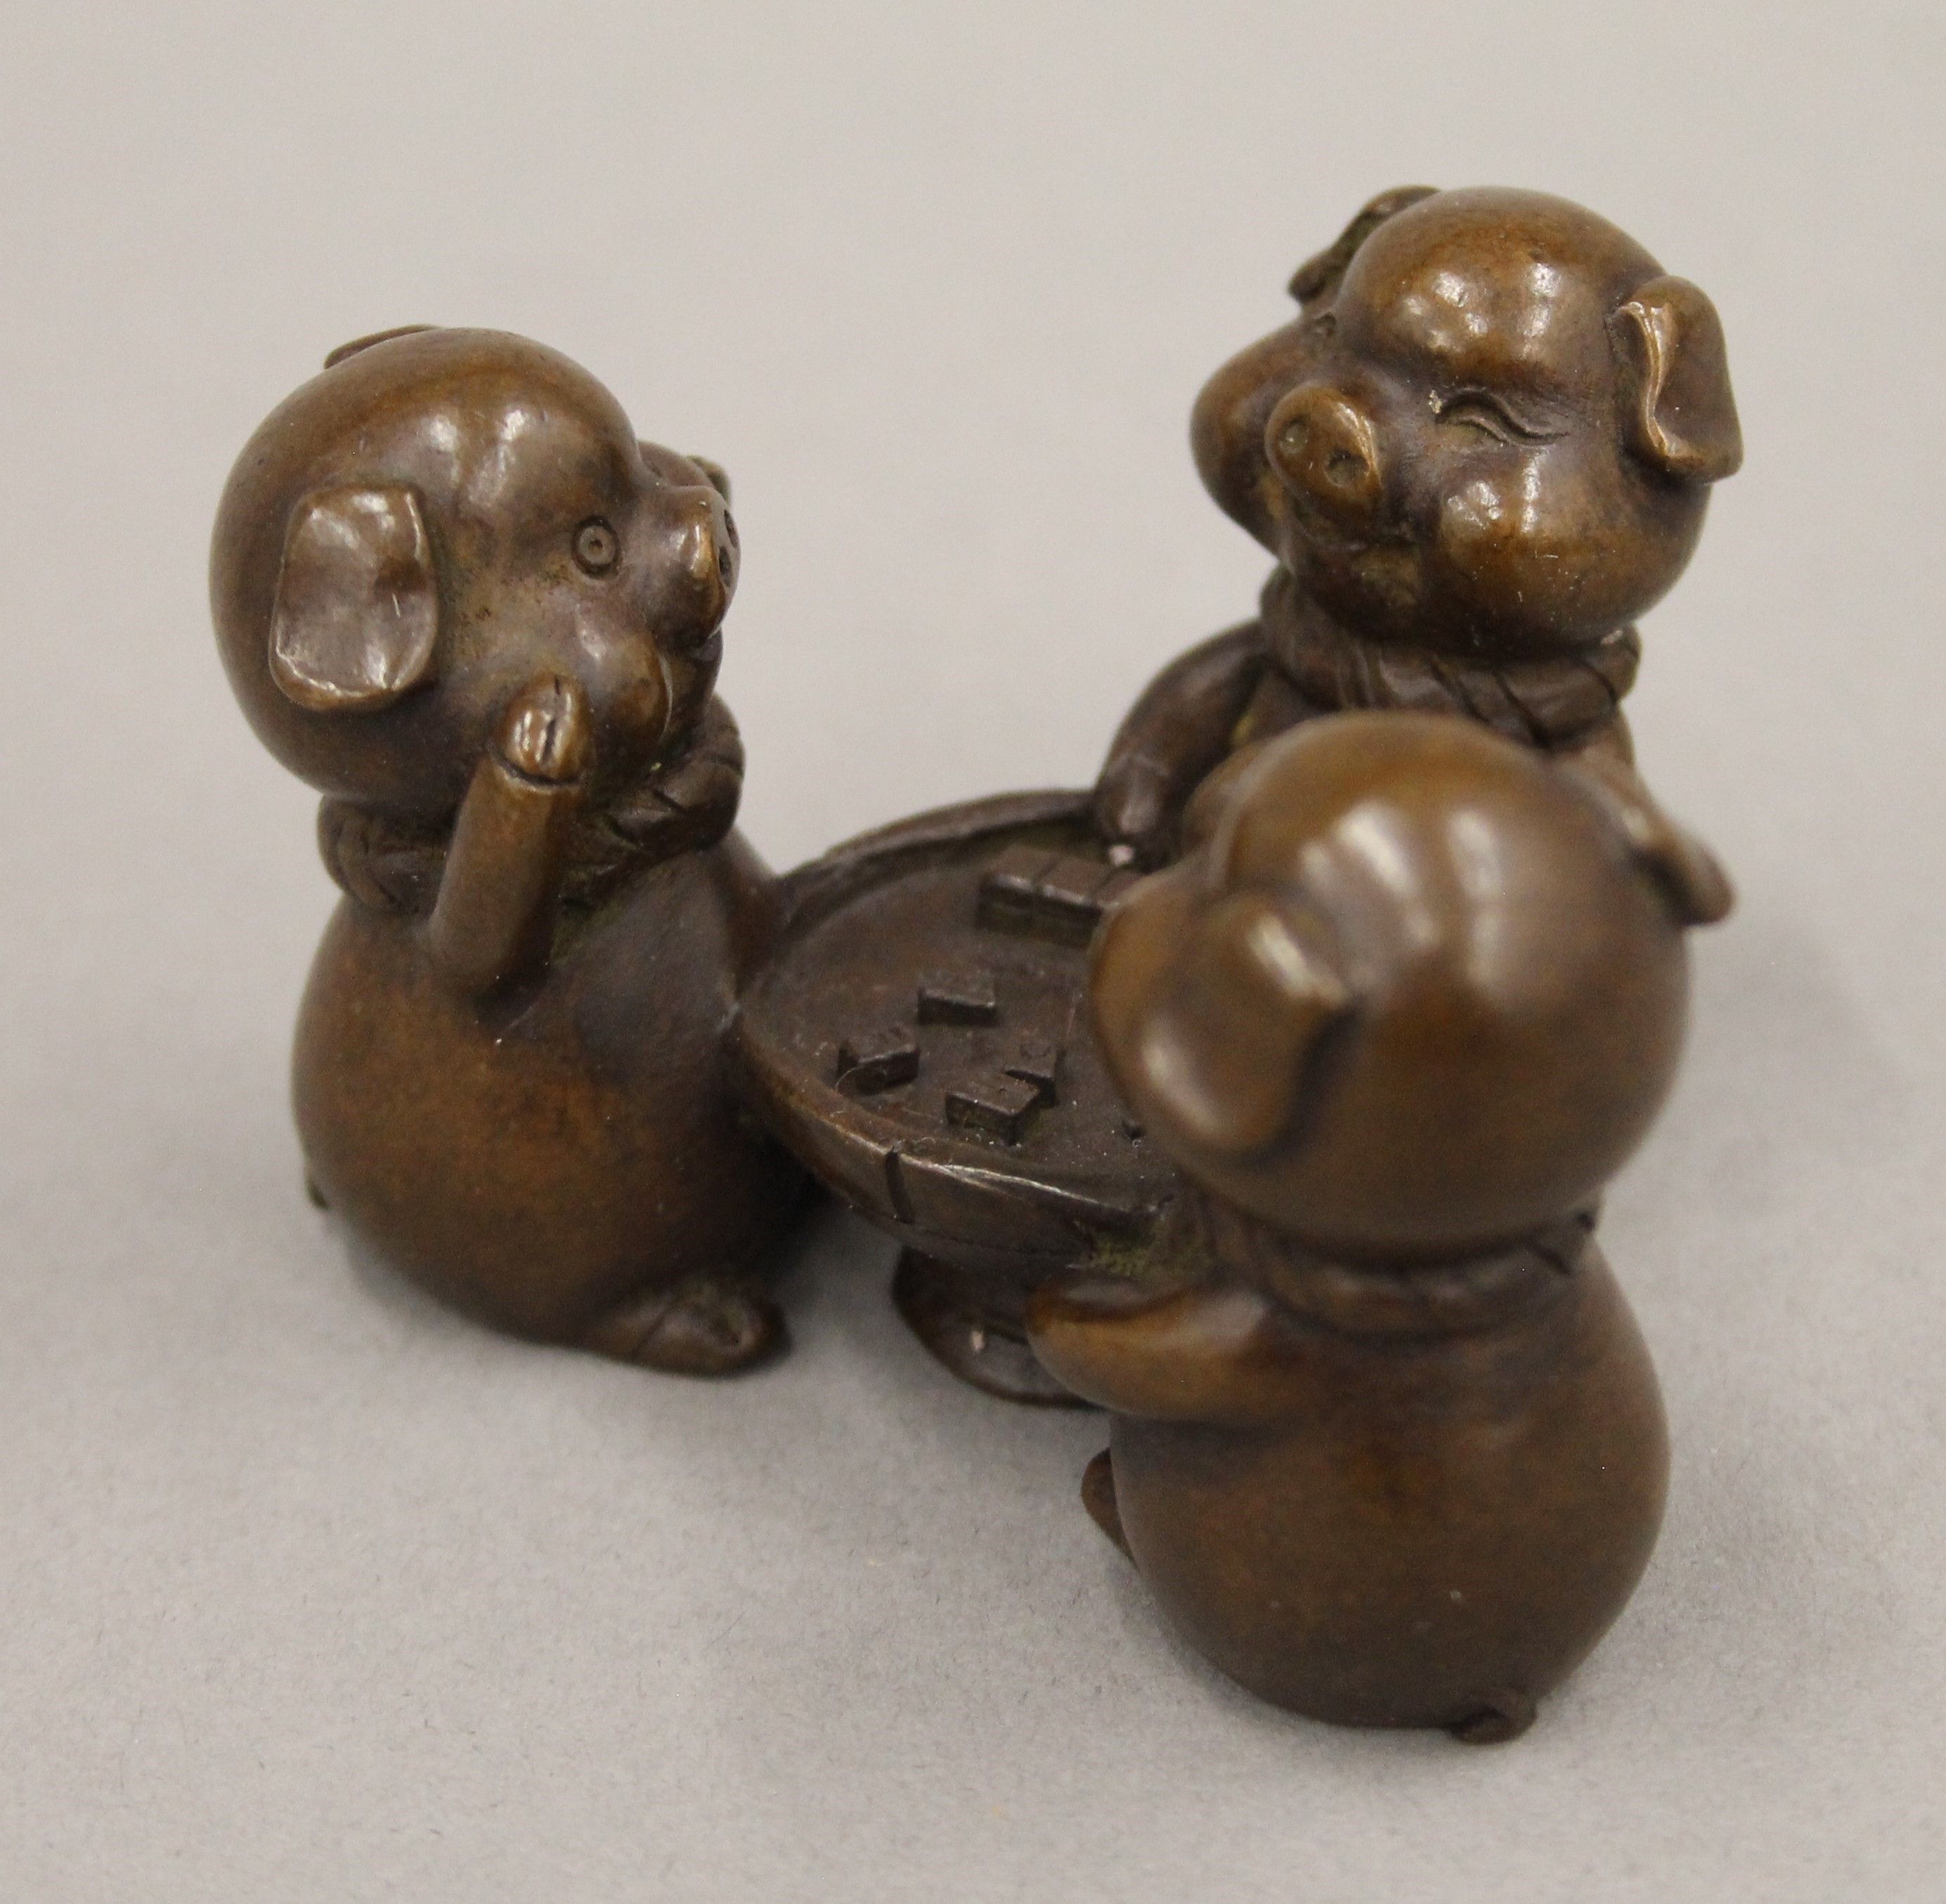 A bronze model of three pigs playing a game. 4.5 cm high. - Image 3 of 6